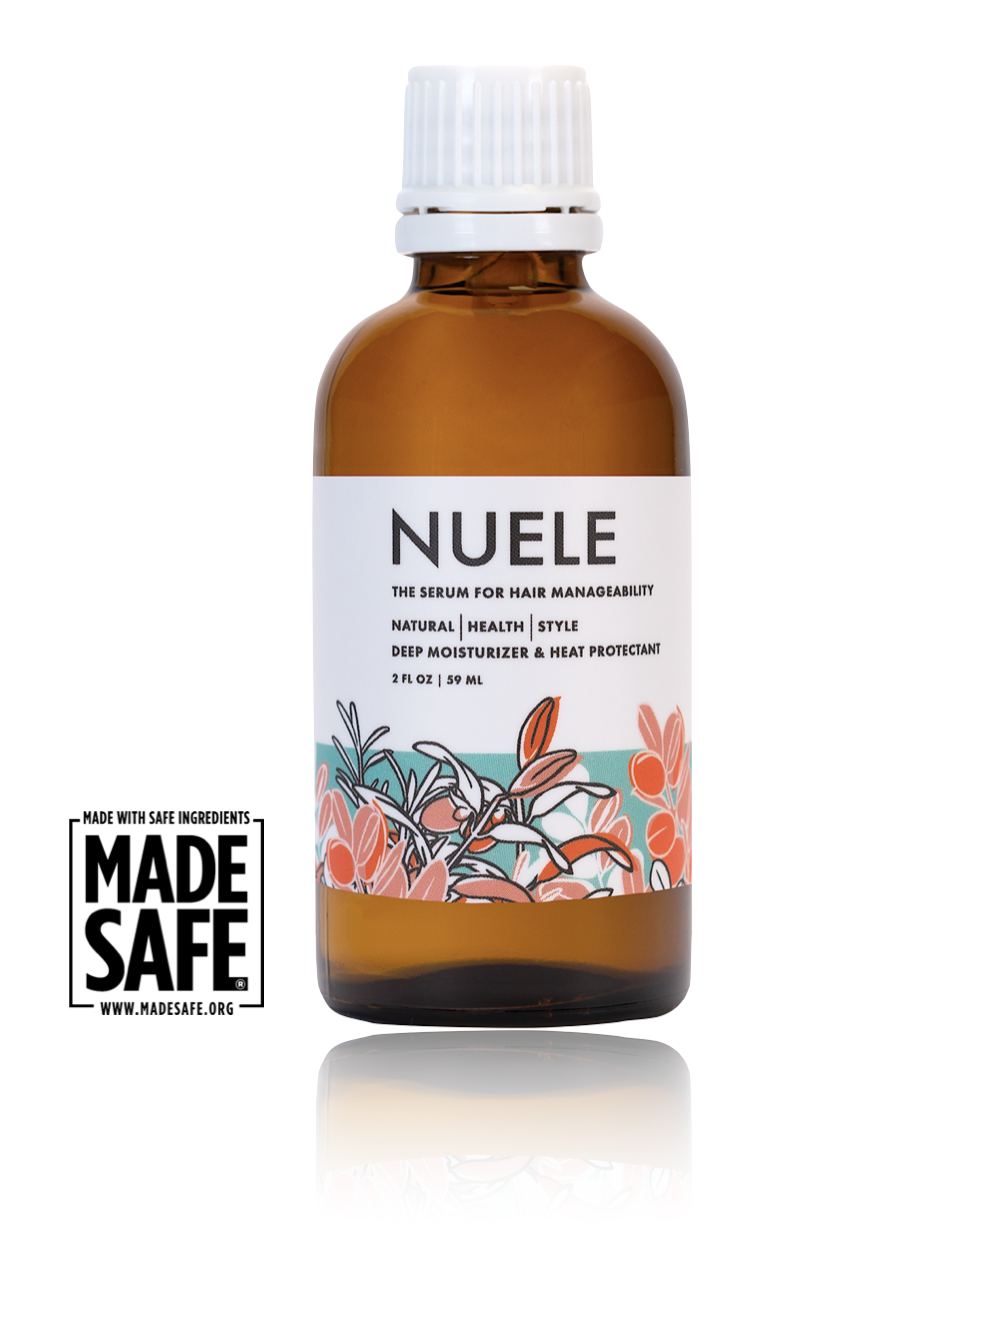 TRIED IT: NUELE Hair Serum Is A Moisturizing Elixir For Thick, Dry Hair